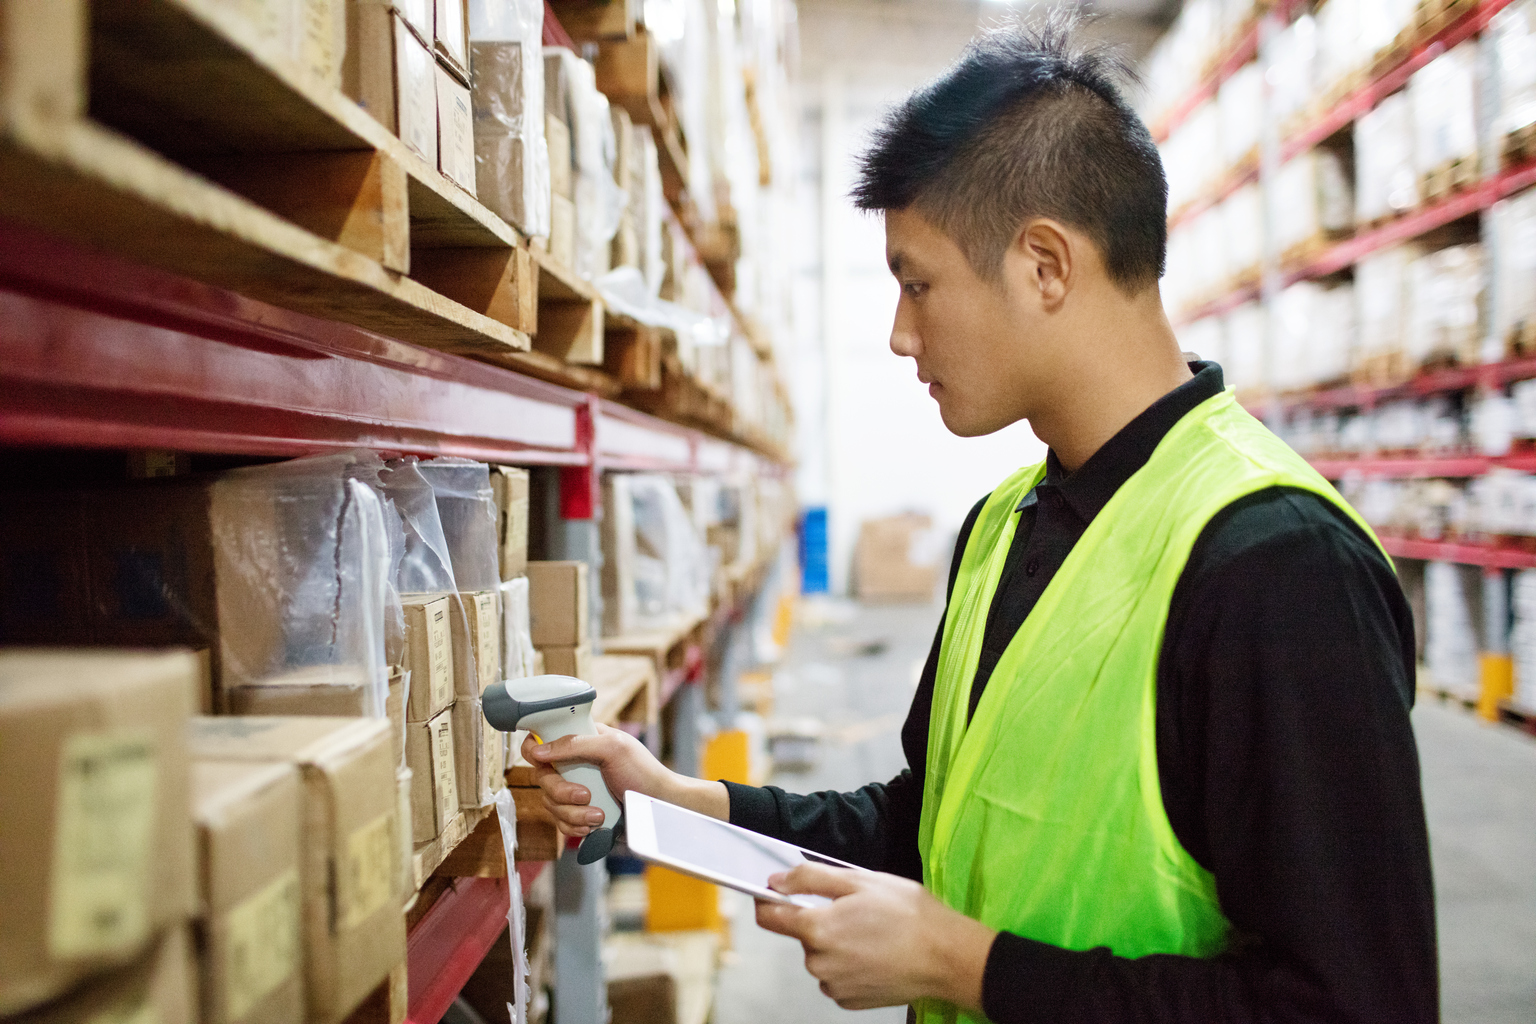 Warehouse worker checking cargo on shelves with scanner. Male worker in uniform holding digital tablet and scanning boxes in shelves